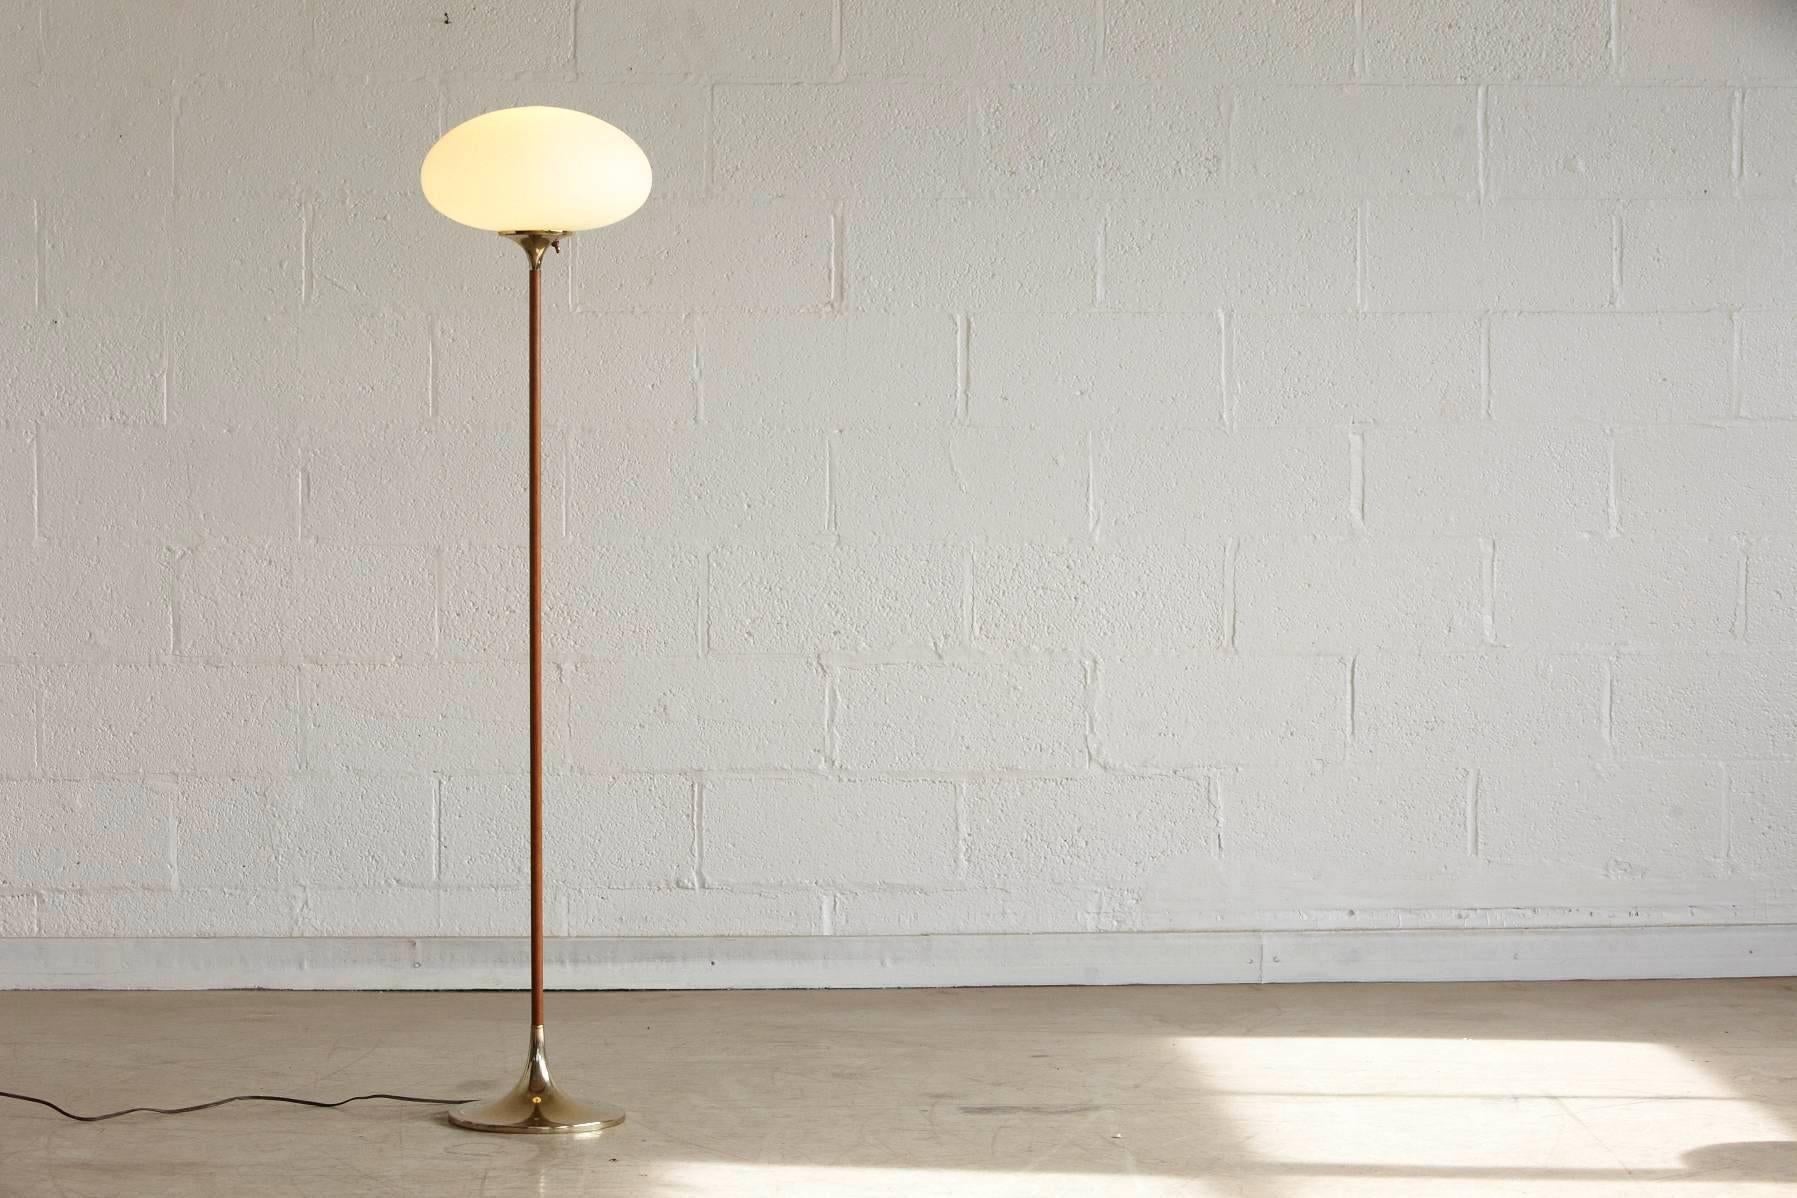 Elegant laurel mushroom floor lamp. Frosted blown glass shade in excellent condition on a brass neck which merges into a slender walnut stem which connects with a polished brass base.
Dimensions: Base diameter 10